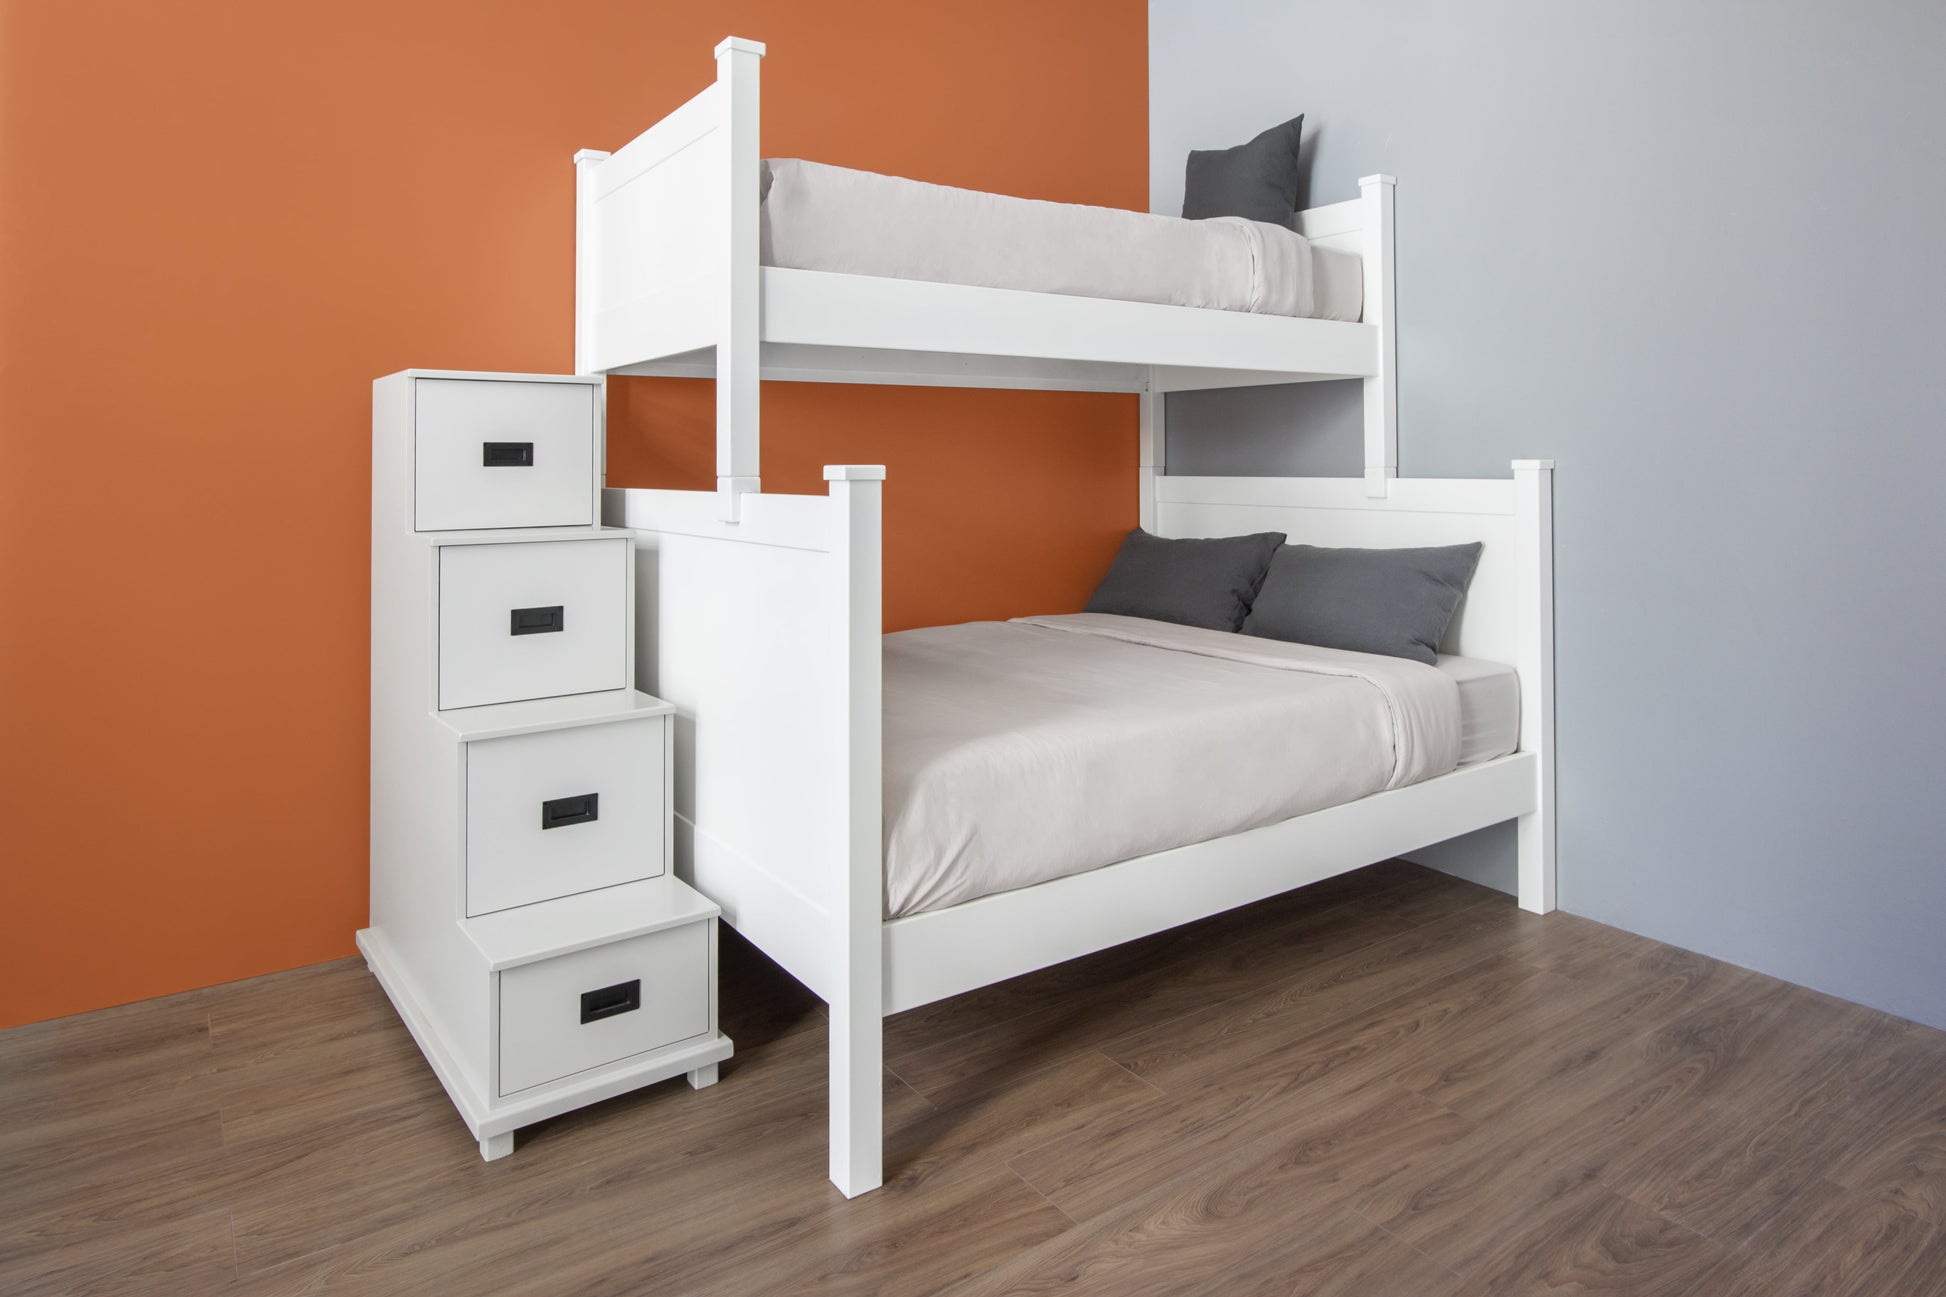 Lynx 2 double bunk bed - The Room